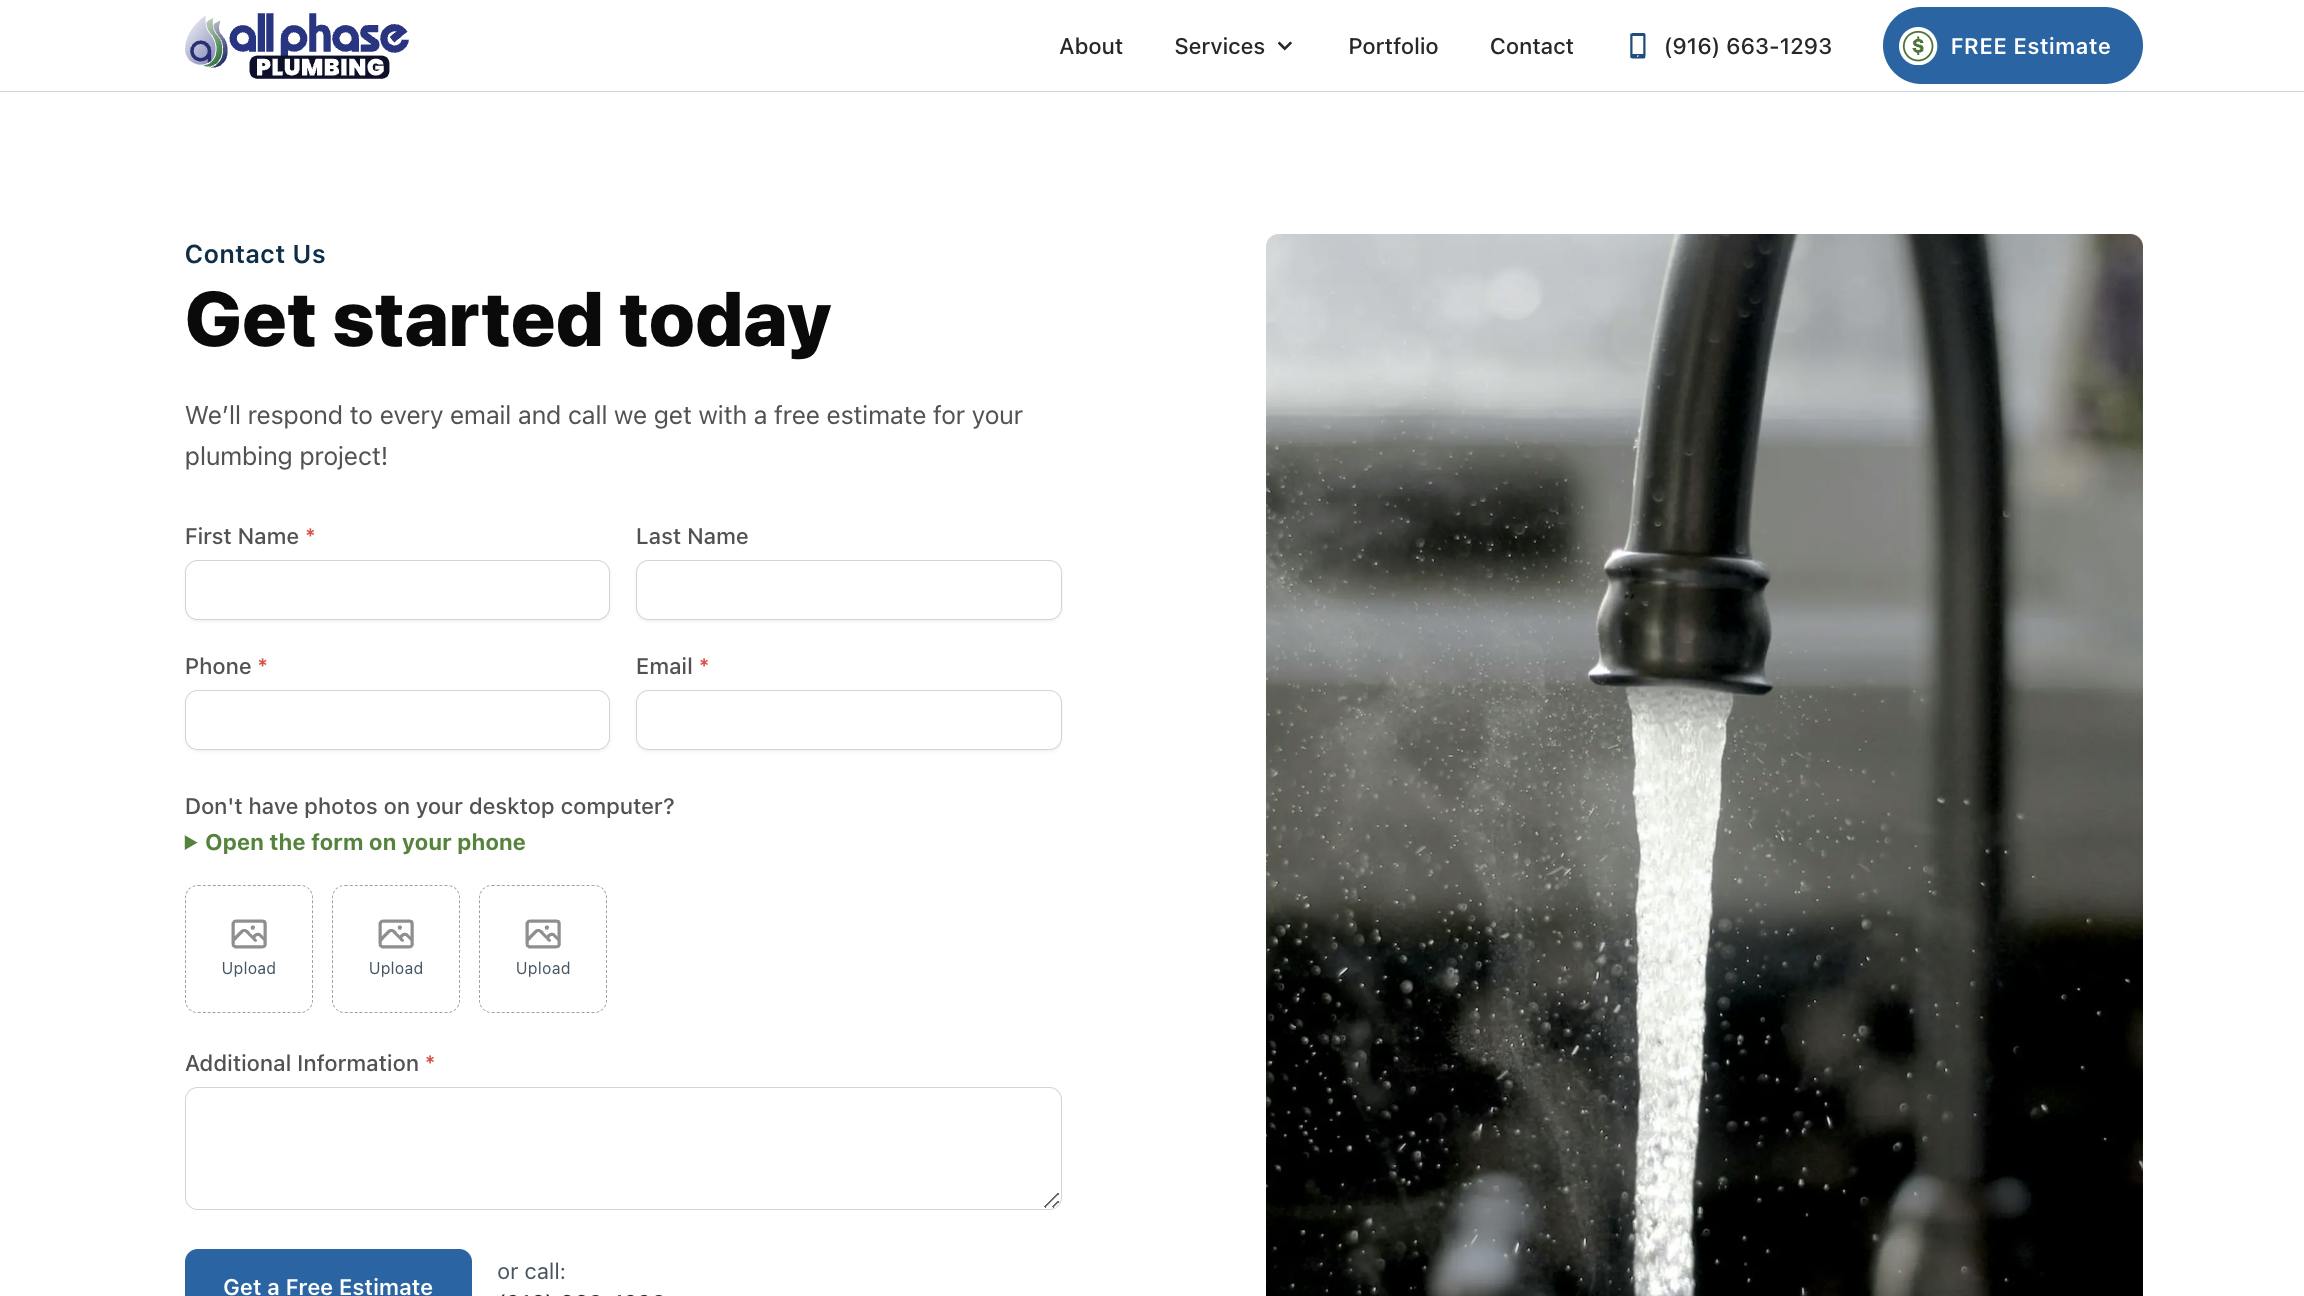 Contact page for All Phase Plumbing with a 'Get started today' header, promising prompt responses for free plumbing estimates. The form requests the user's first and last name, phone, and email, with an option to upload photos directly from a phone. To the right, a high-definition image shows a close-up of water flowing from a faucet, emphasizing their focus on plumbing solutions.